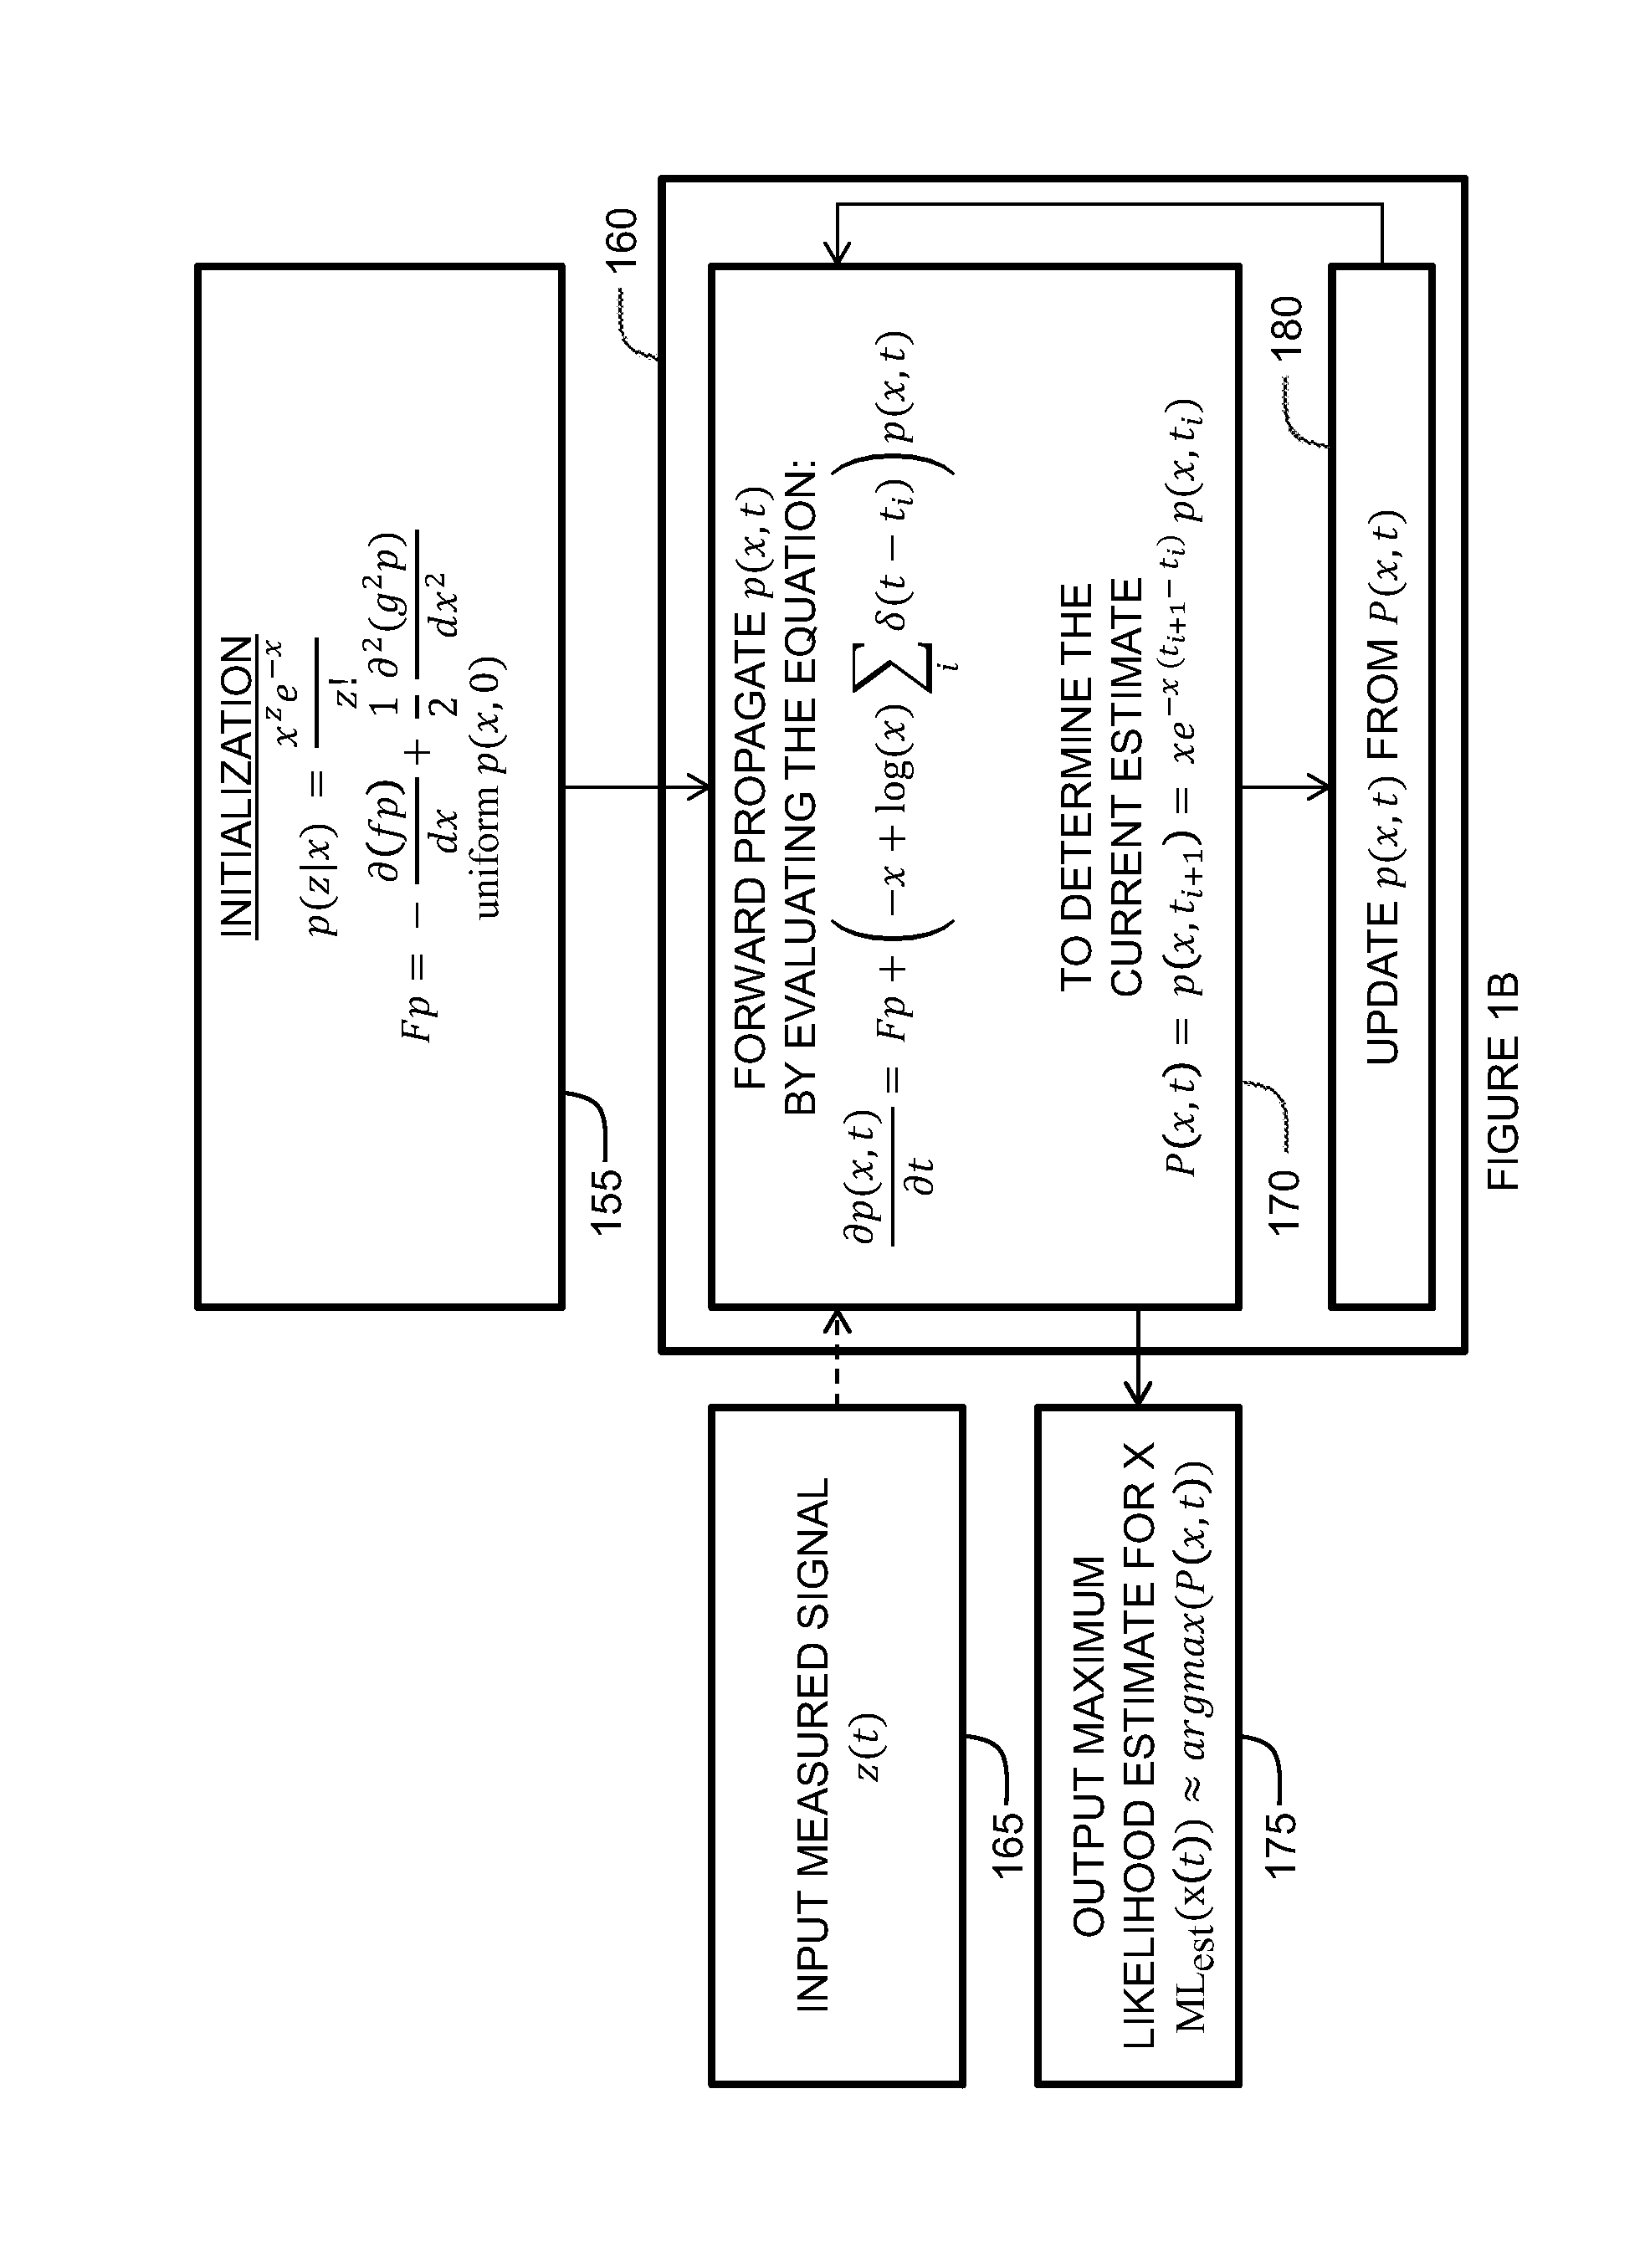 Systems, Methods, and Uses of a Bayes-Optimal Nonlinear Filtering Algorithm